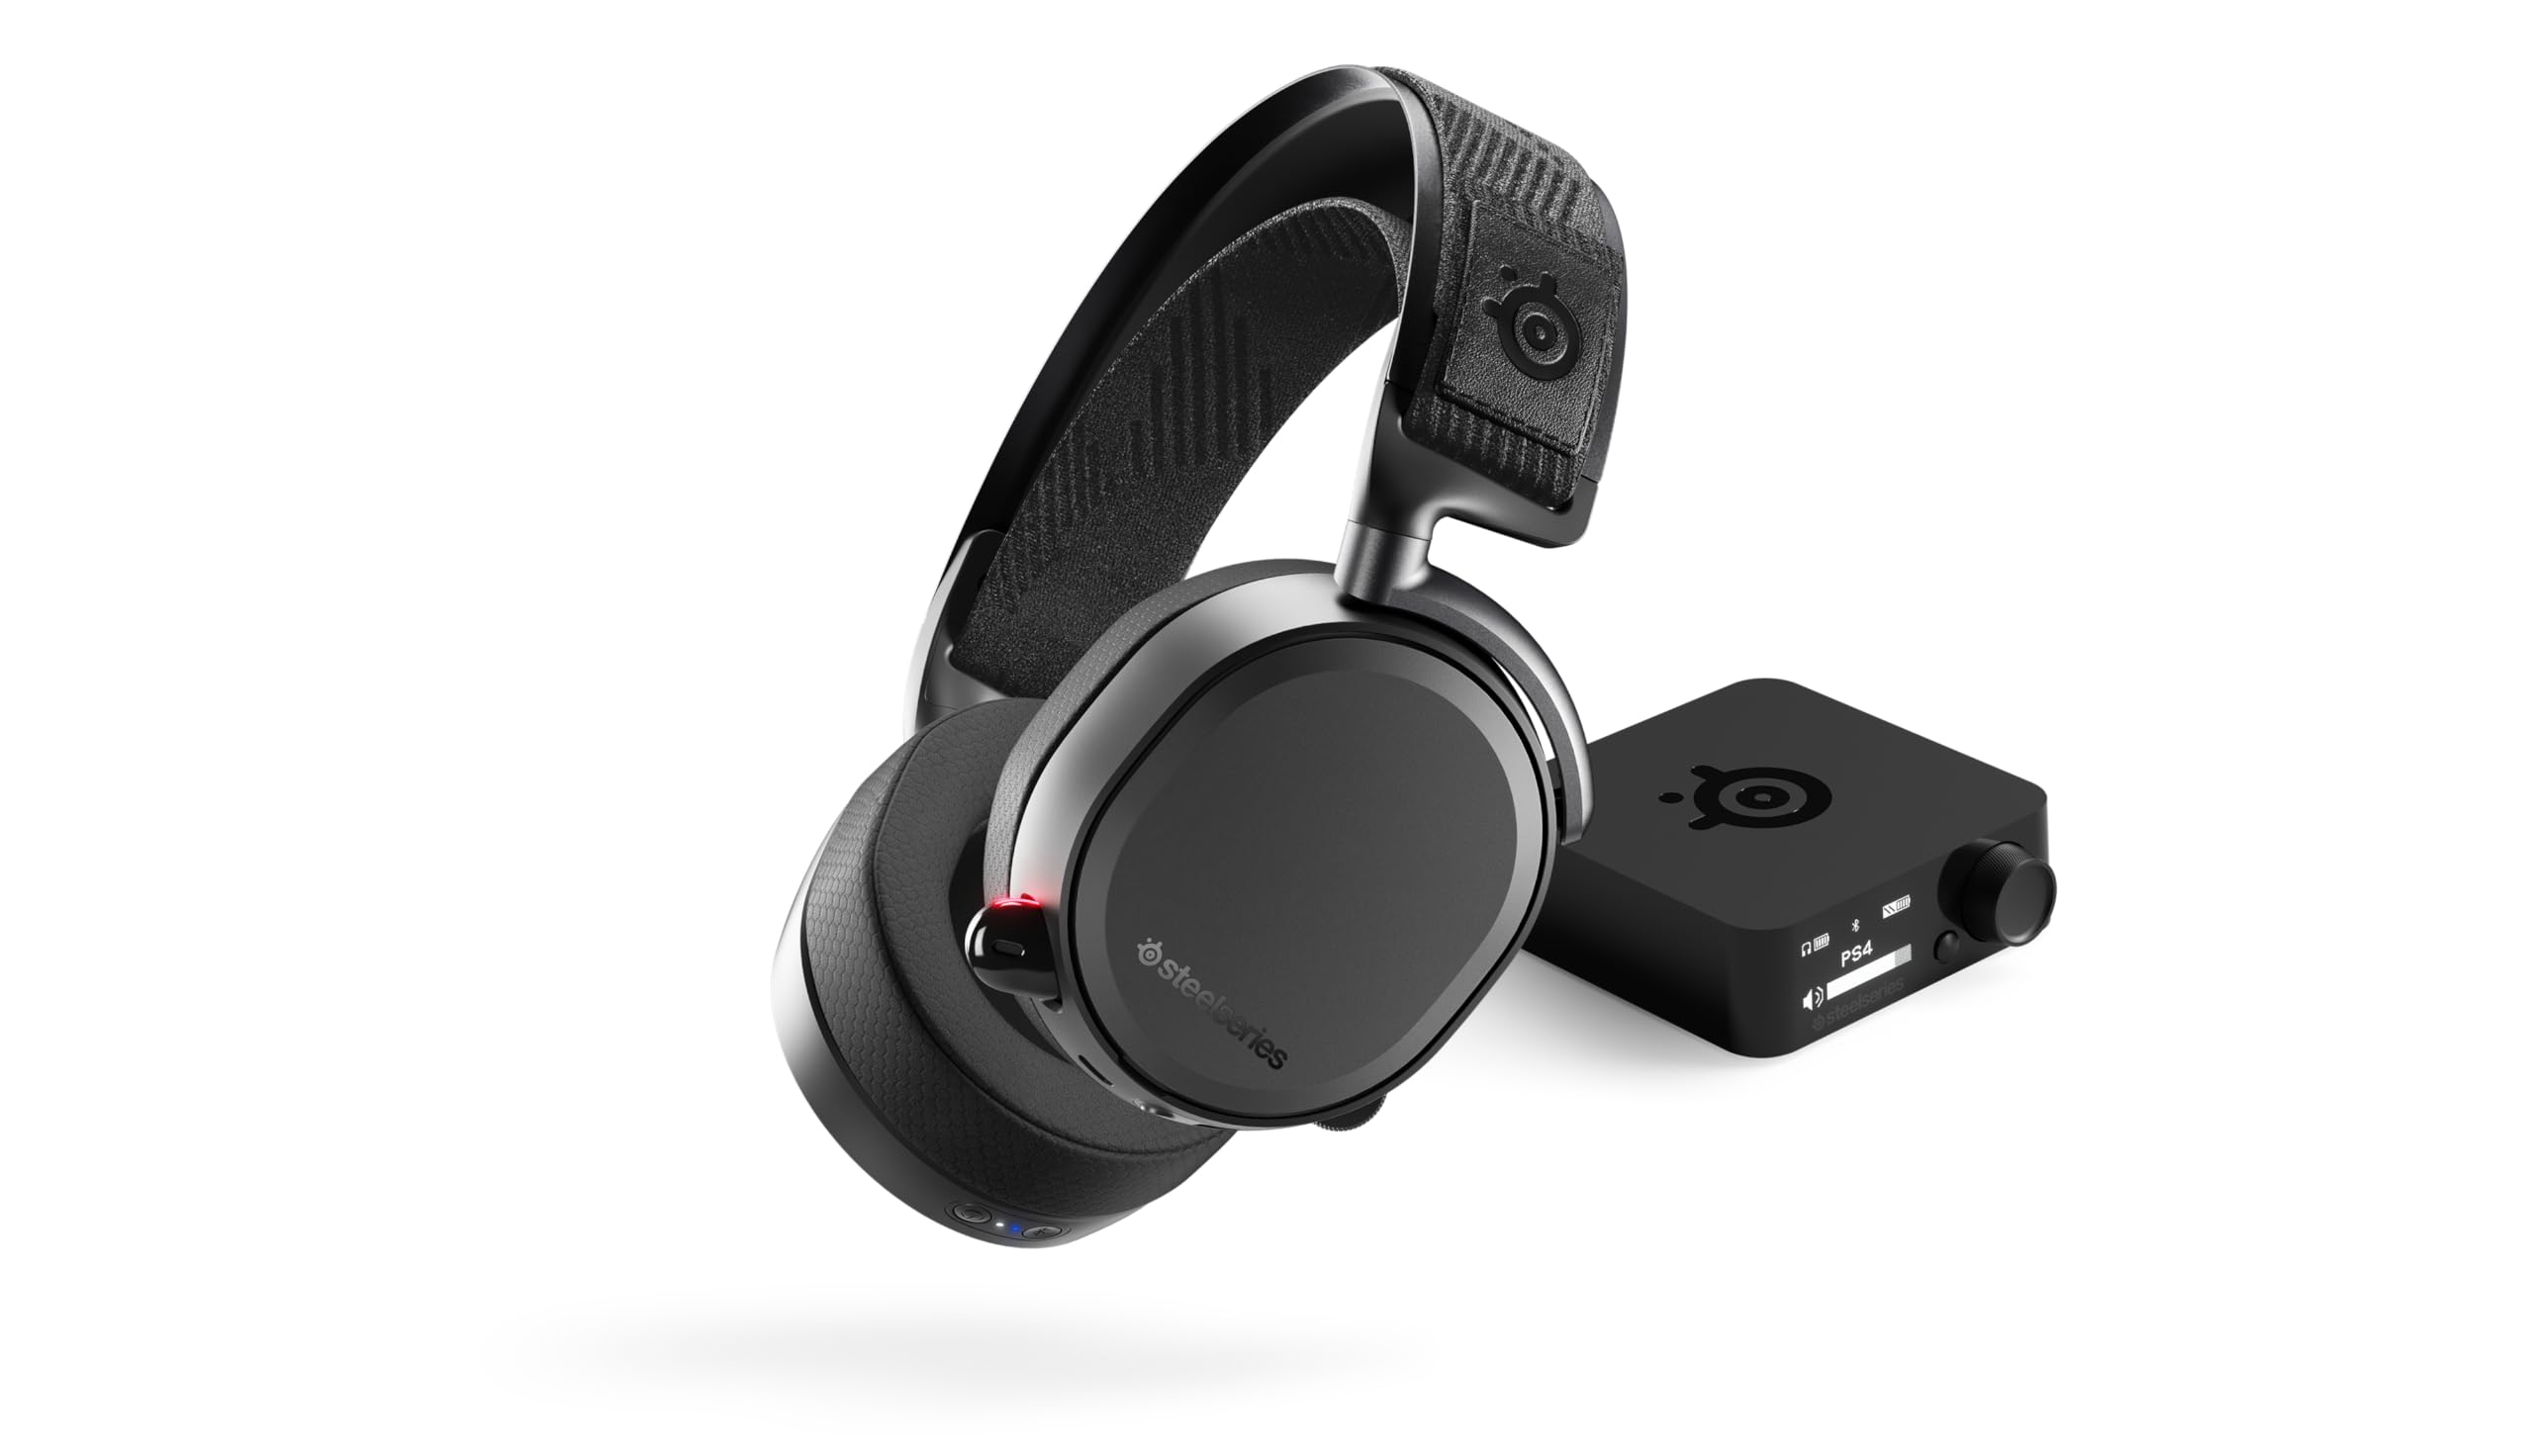 SteelSeries Arctis Pro Bluetooth + 2.4Ghz Wireless Gaming Headset $198.05 + Free Shipping